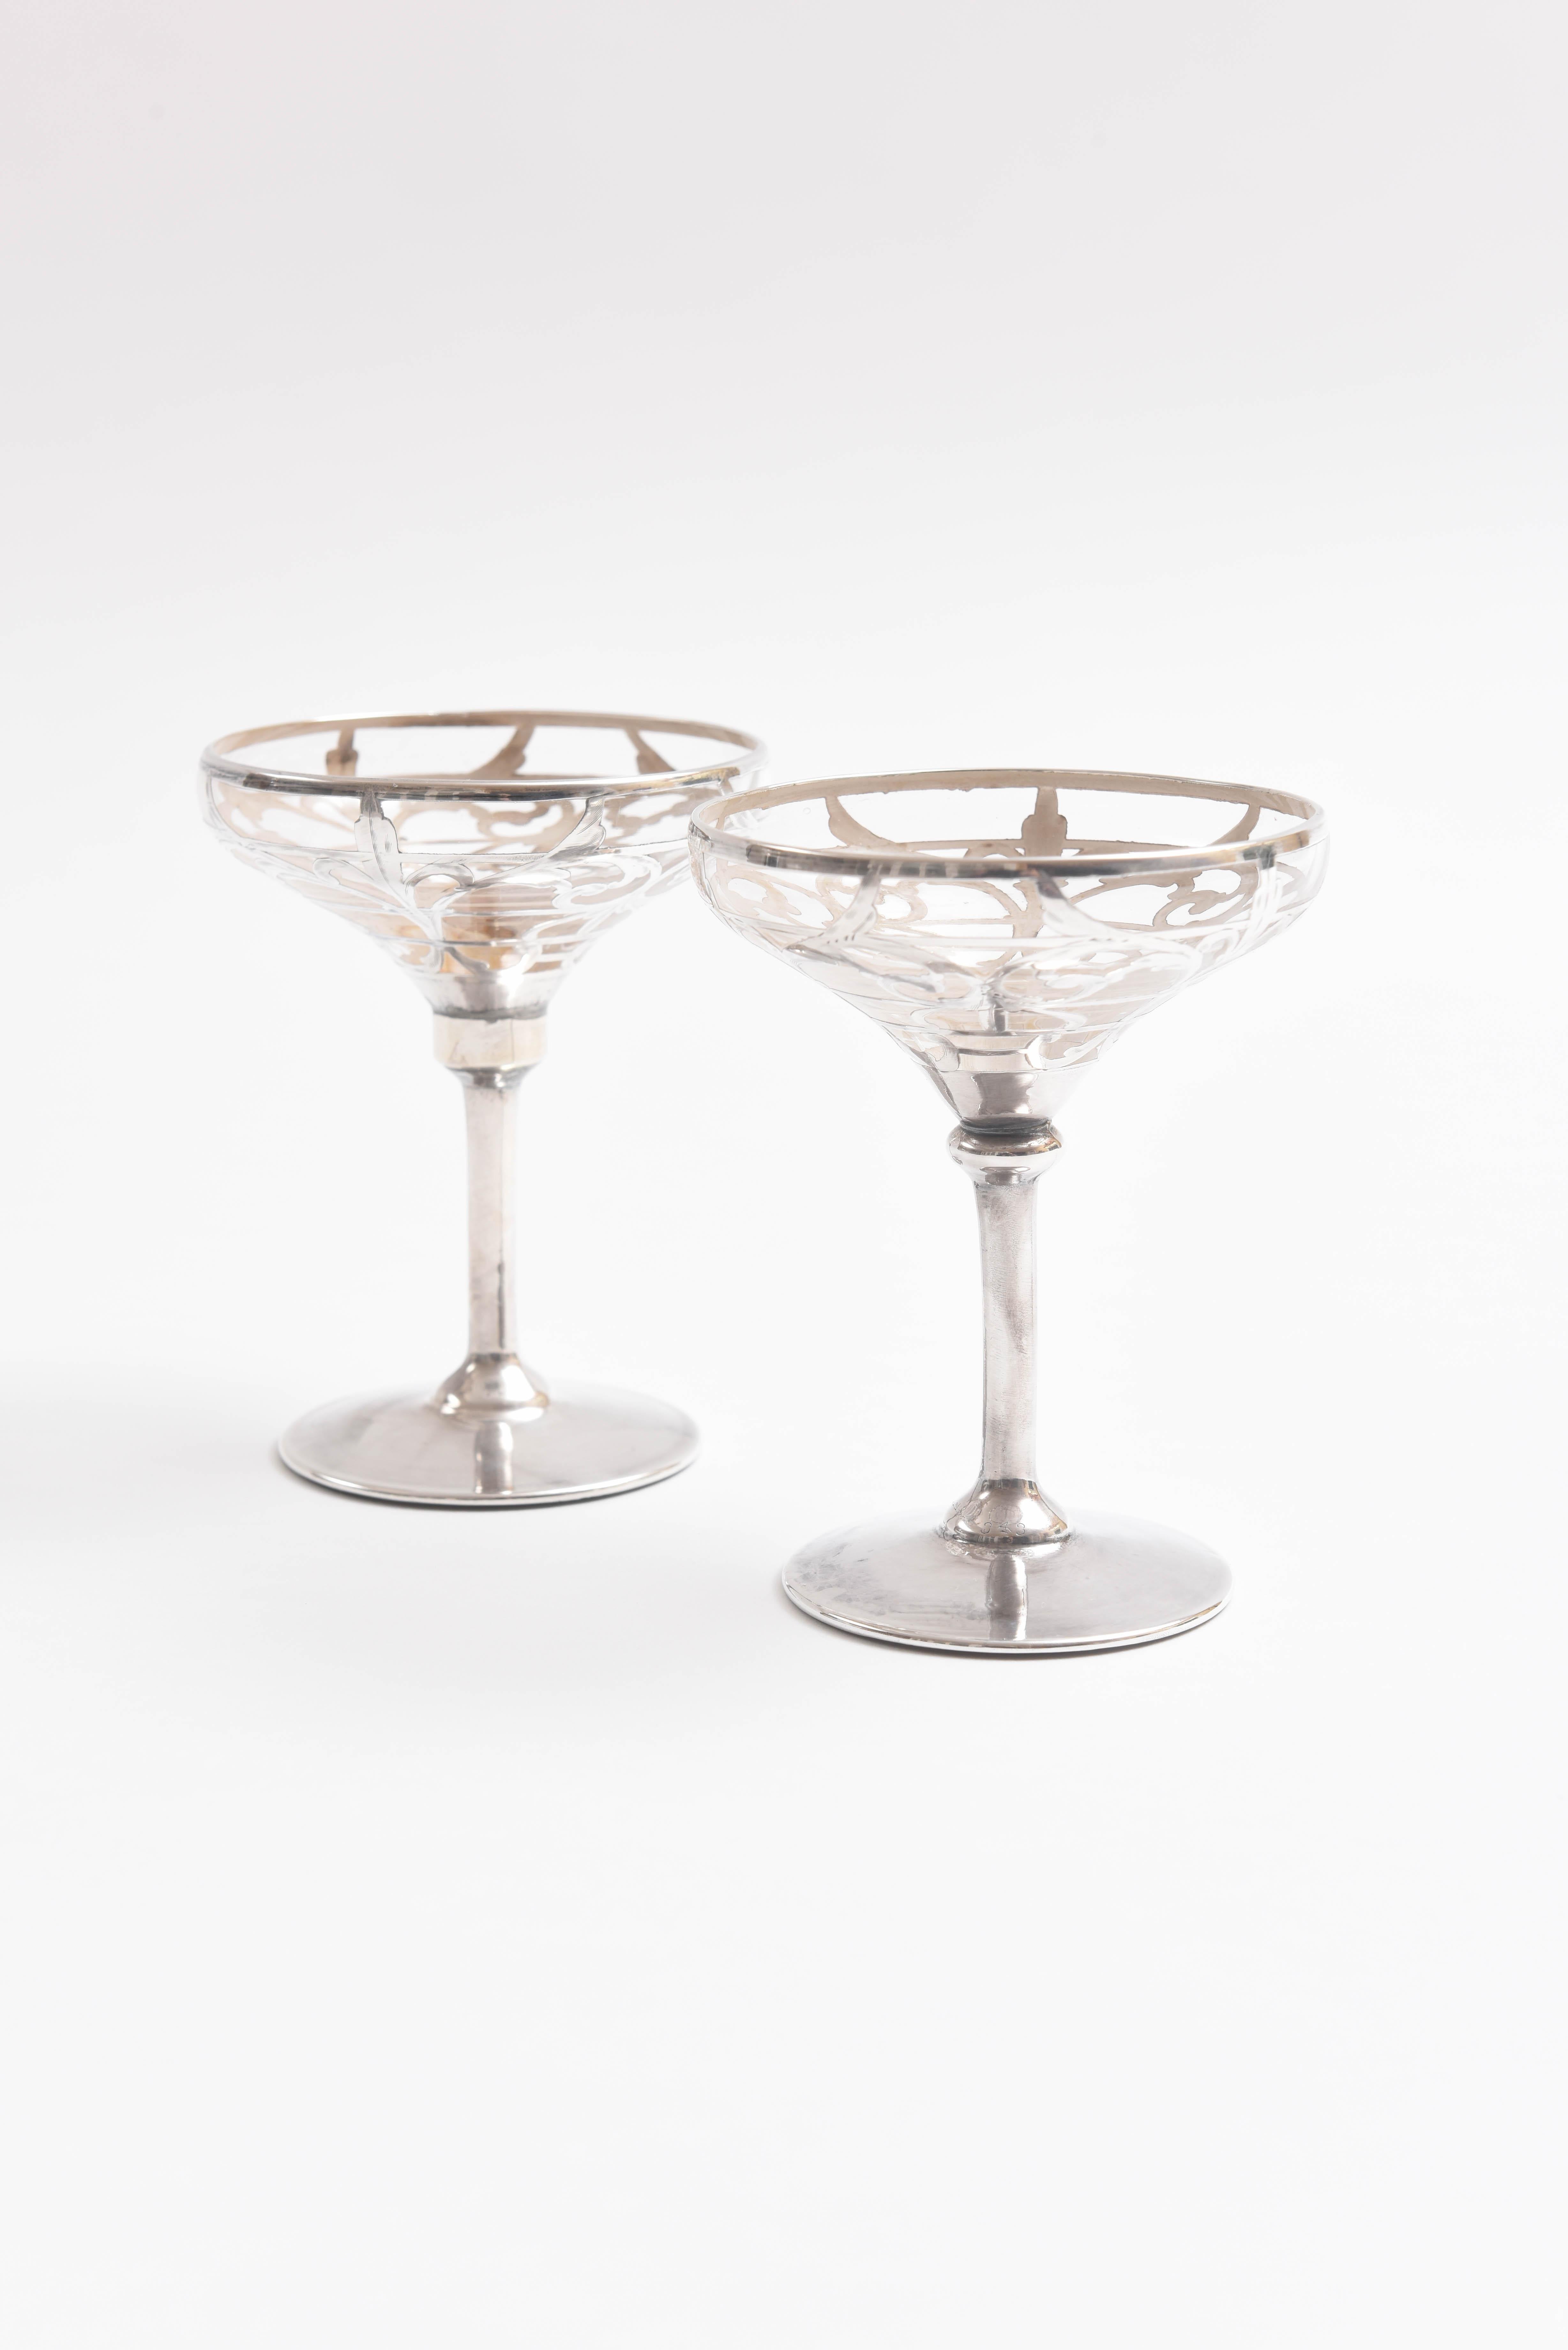 Hand-Crafted Six Sterling Overlay Champagne Coupes, Antique Art Nouveau